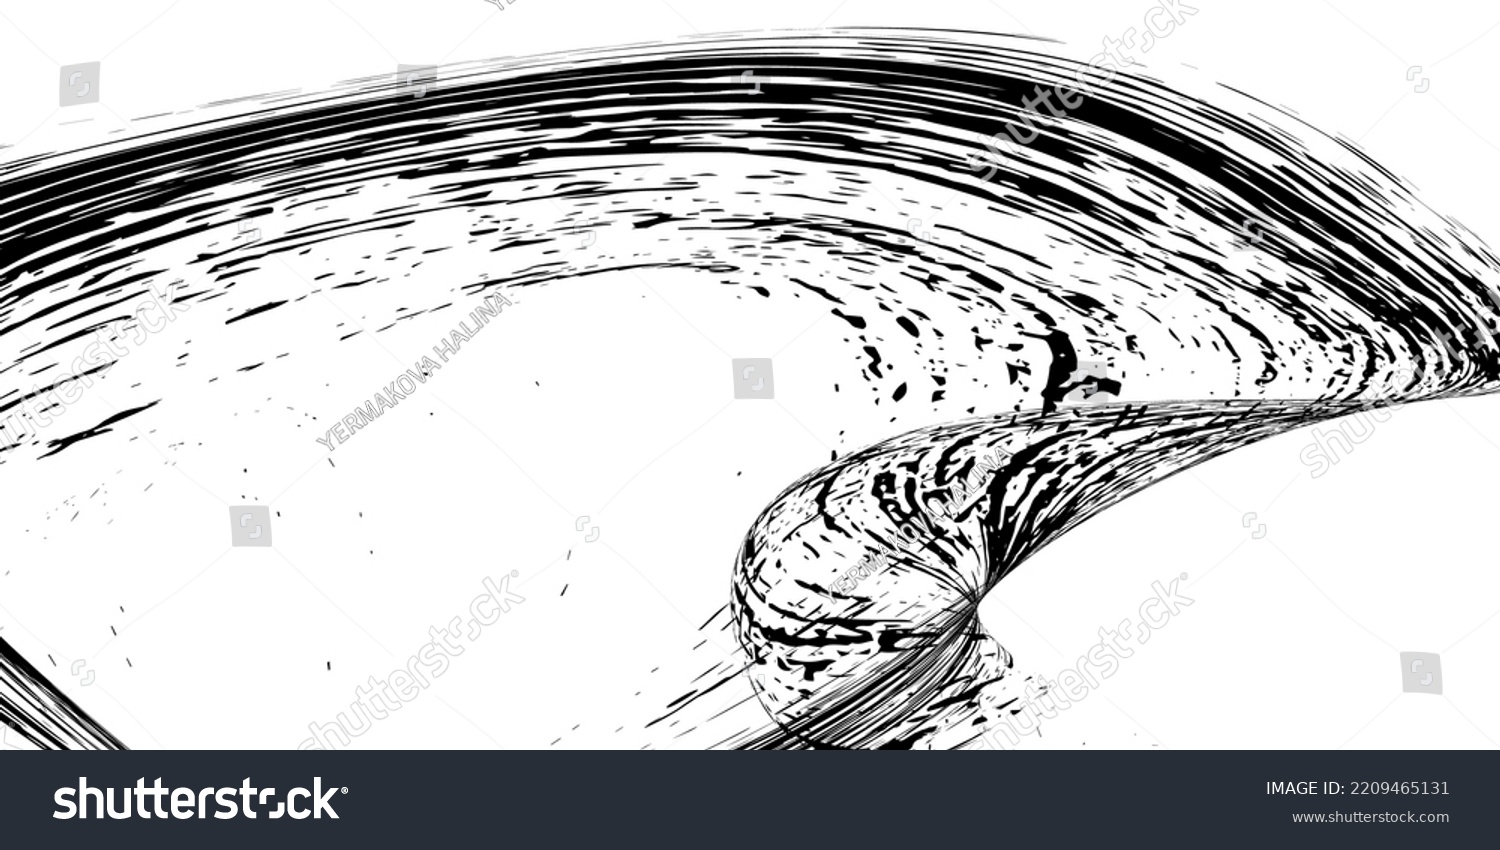 Strokes Different Directions Black Paint On Stock Vector (royalty Free 